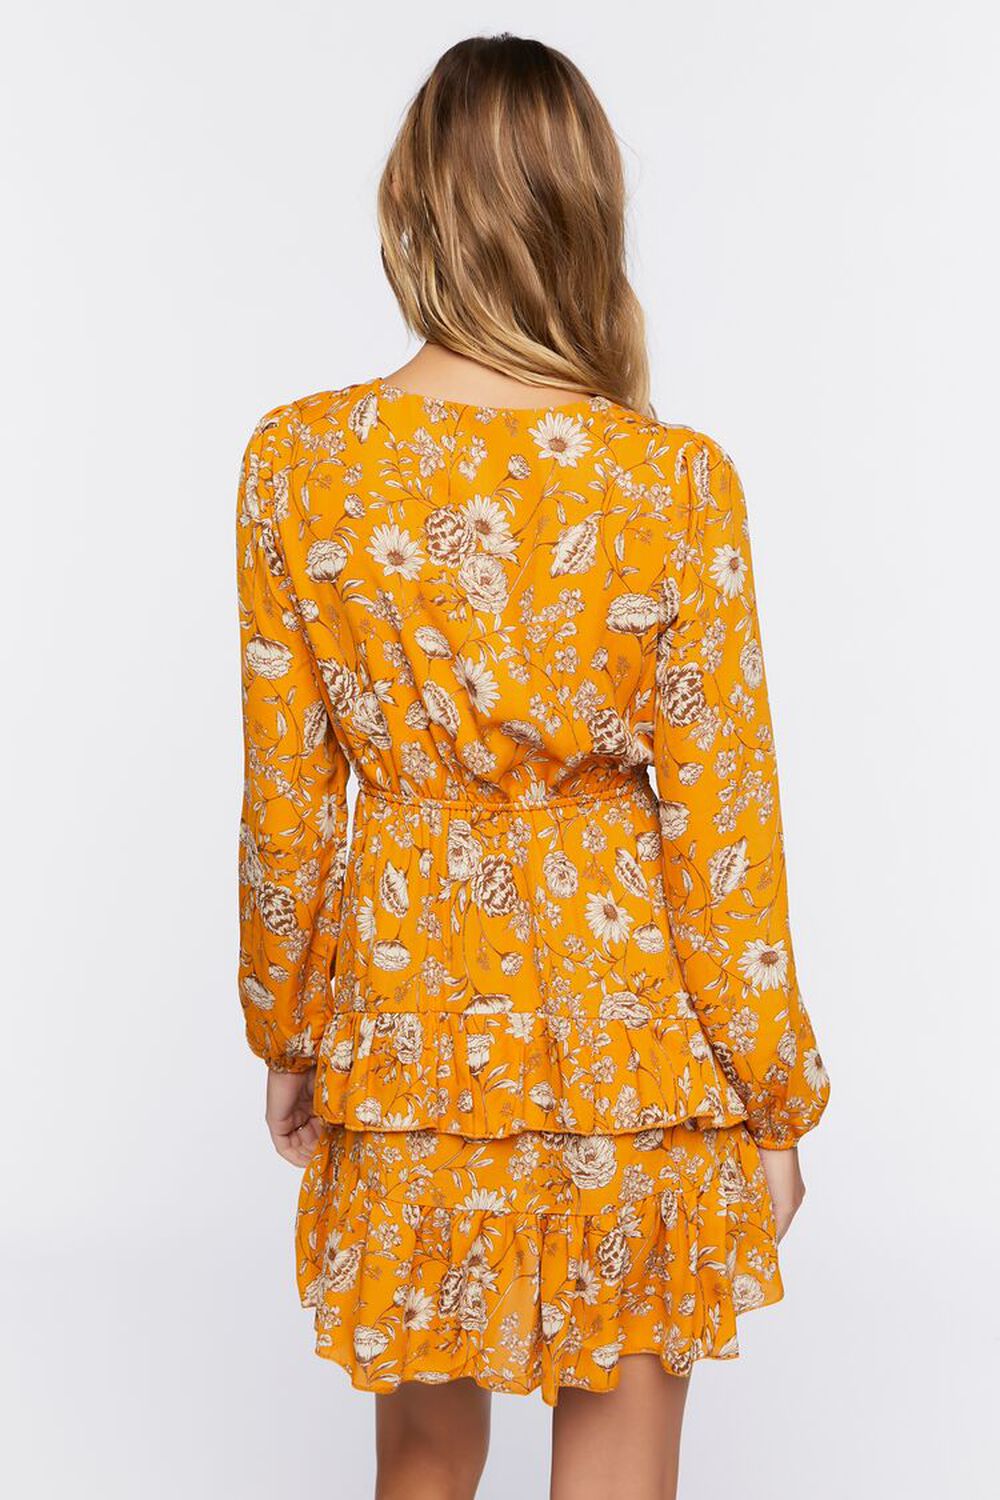 YELLOW/MULTI Floral Tiered Mini Dress, image 3